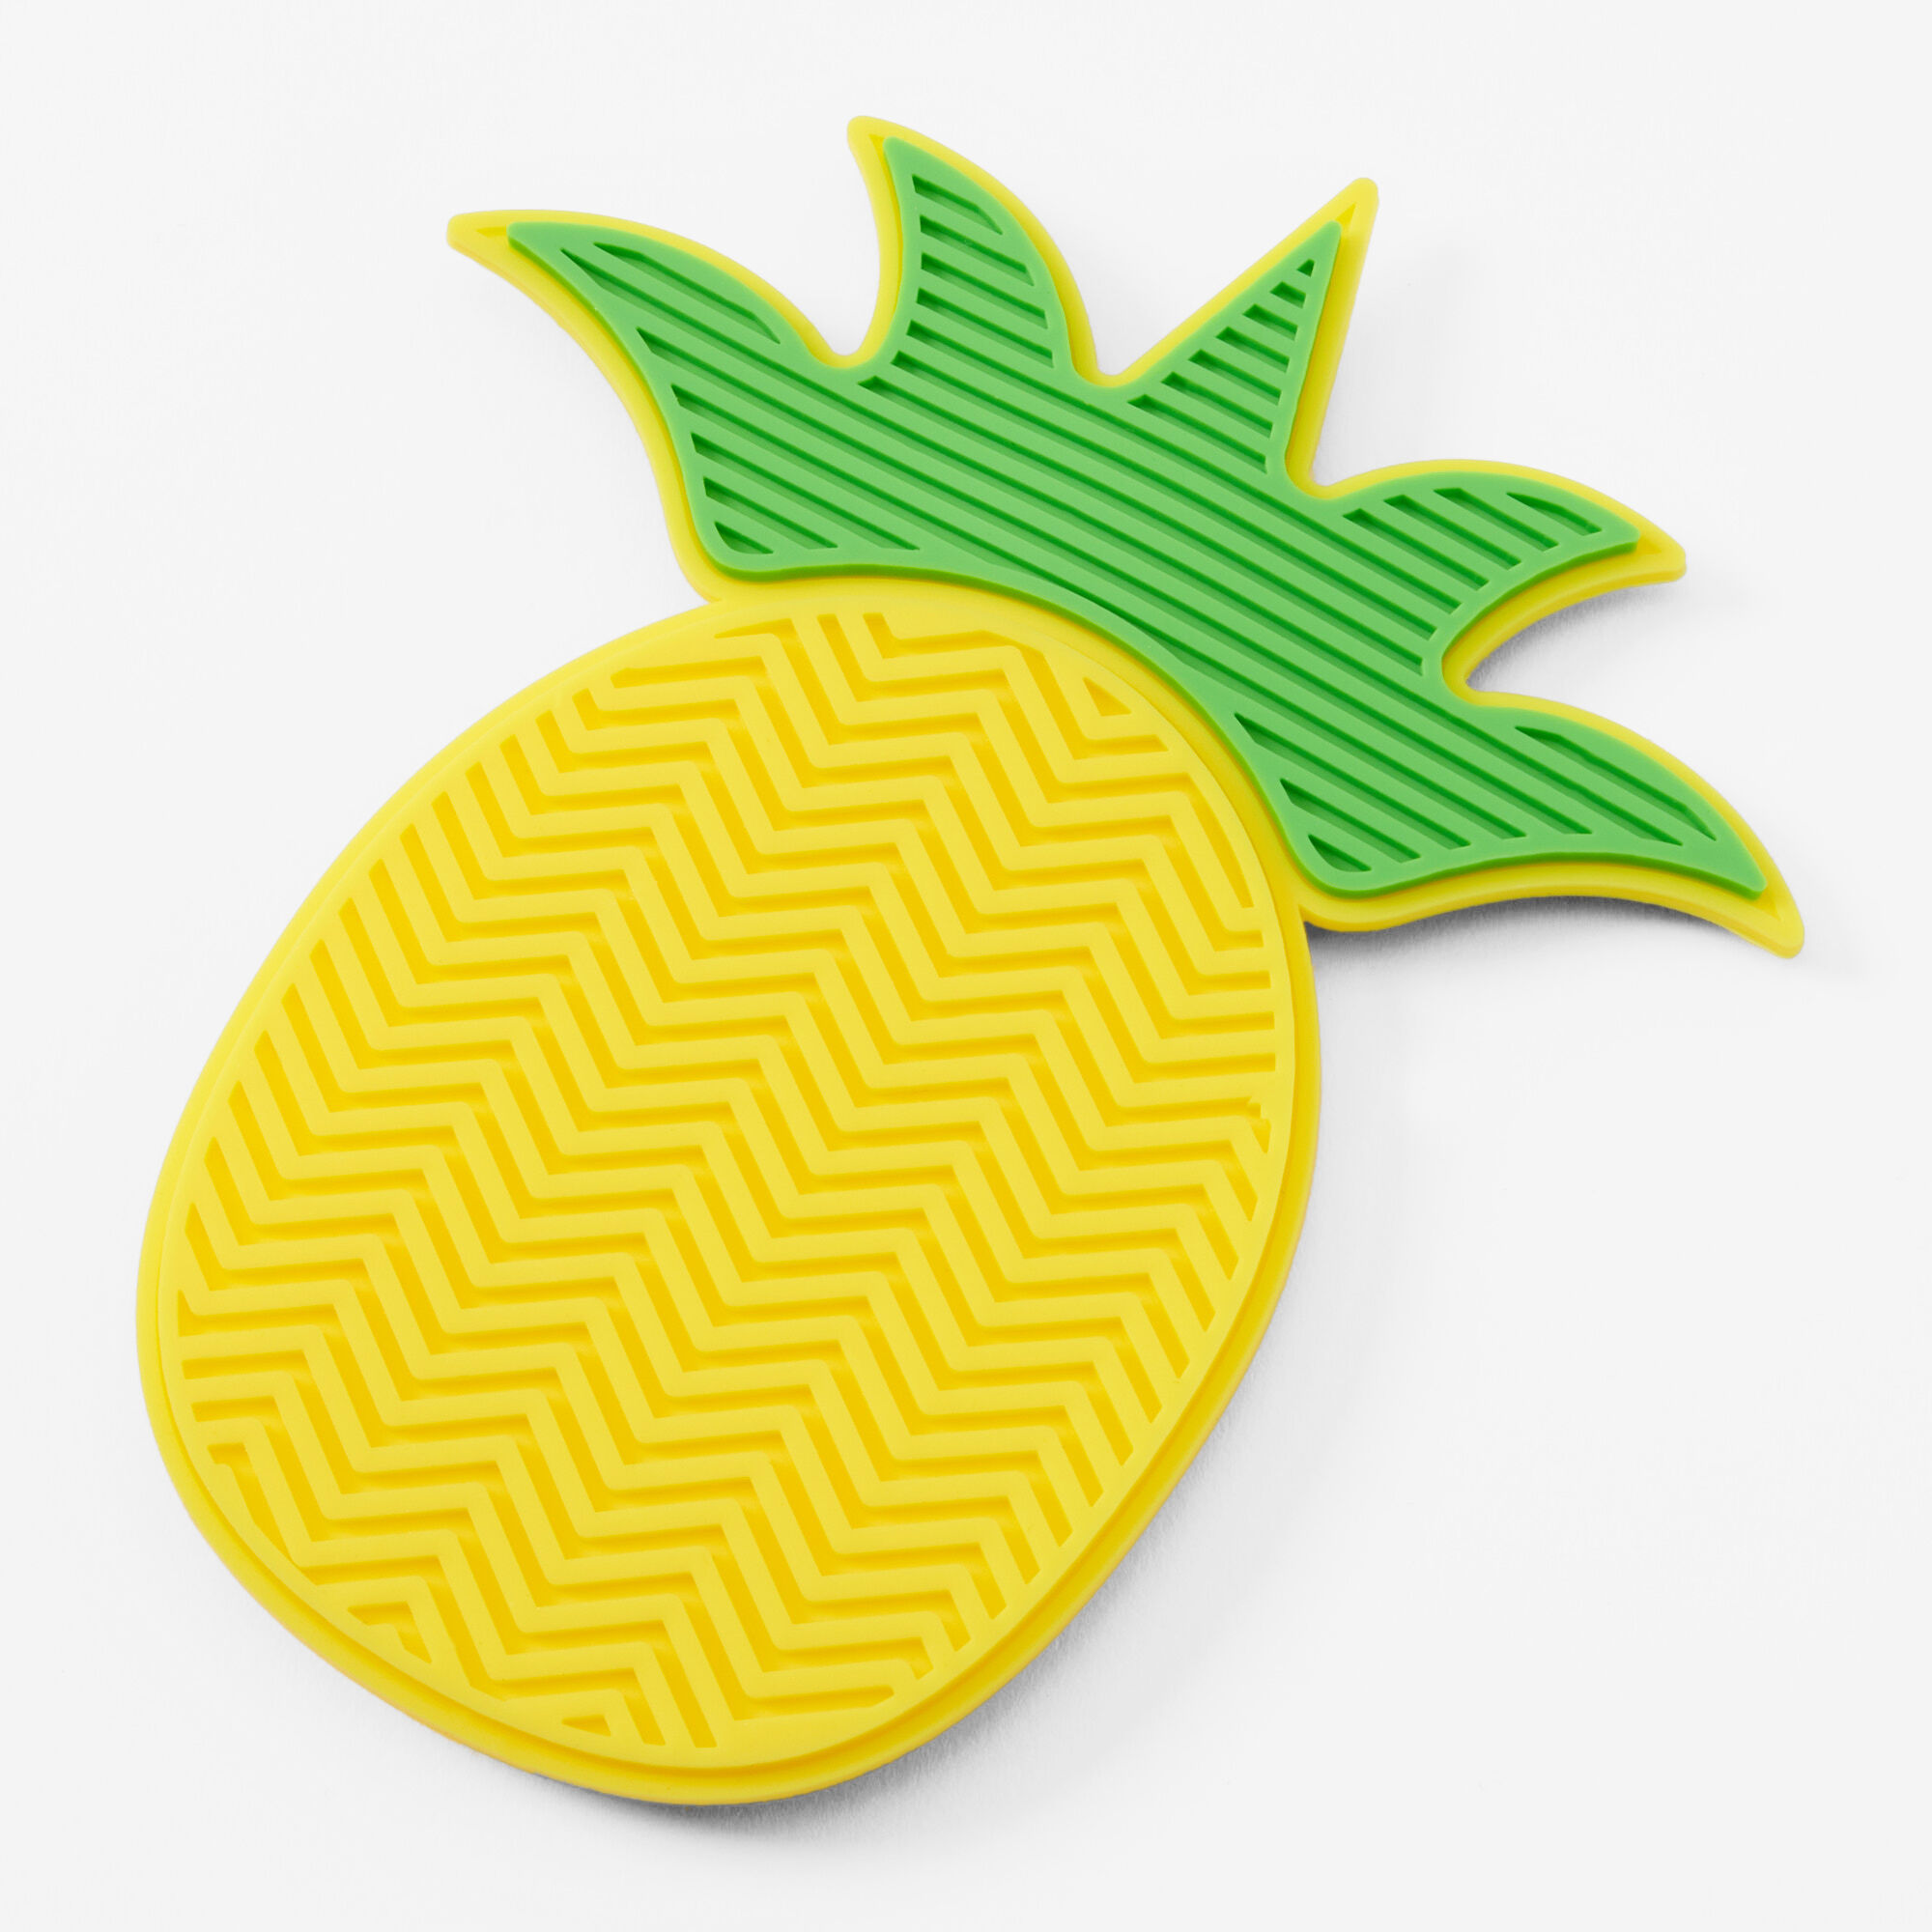 View Claires Pineapple Brush Scrubber Mat information